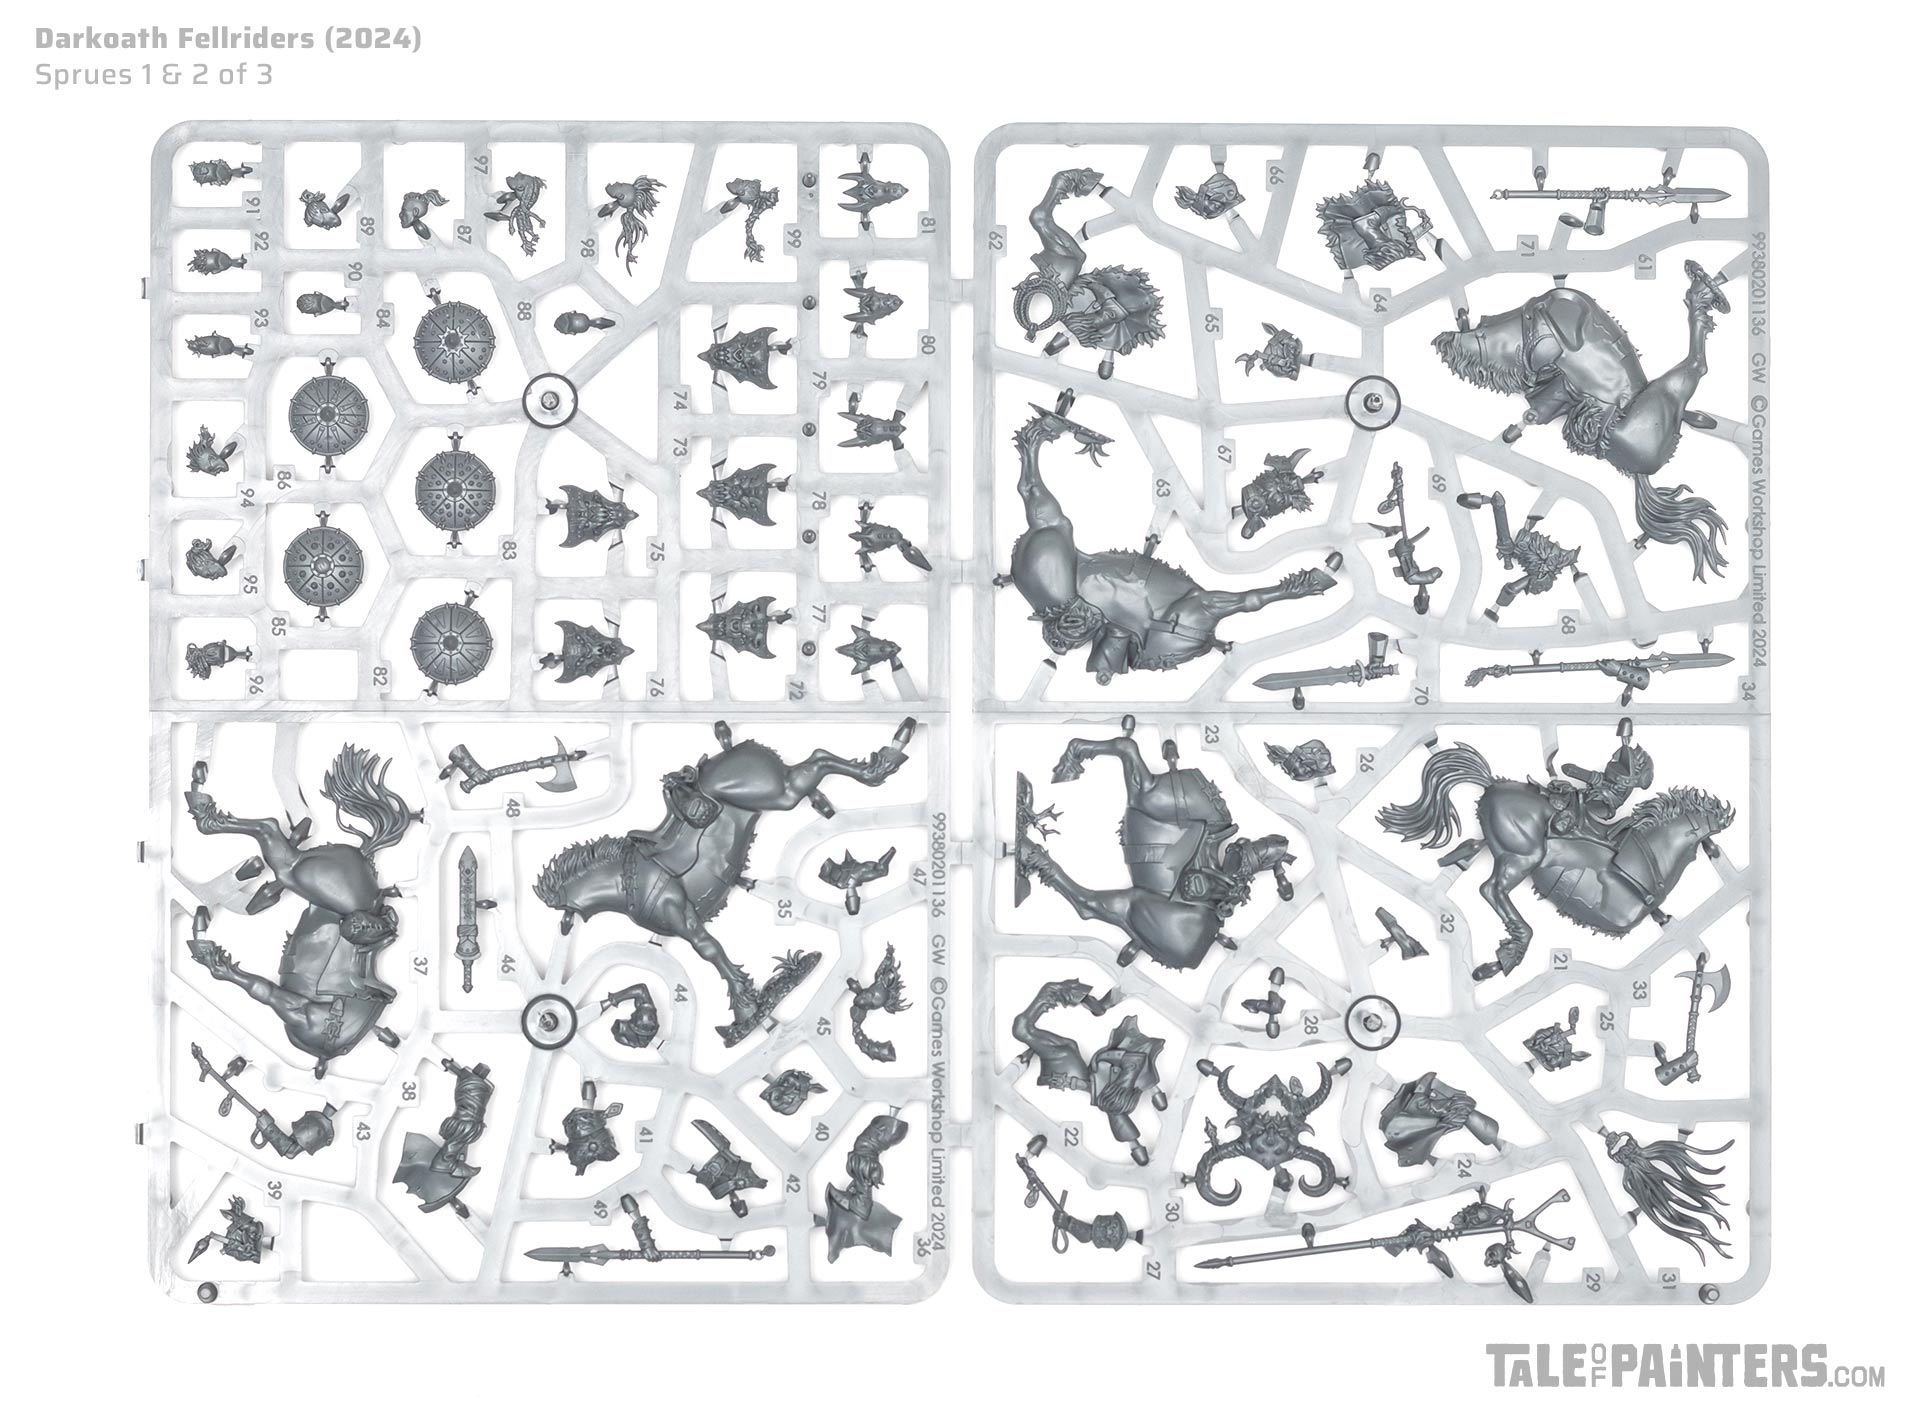 Darkoath Fellriders sprues 1 and 2 review